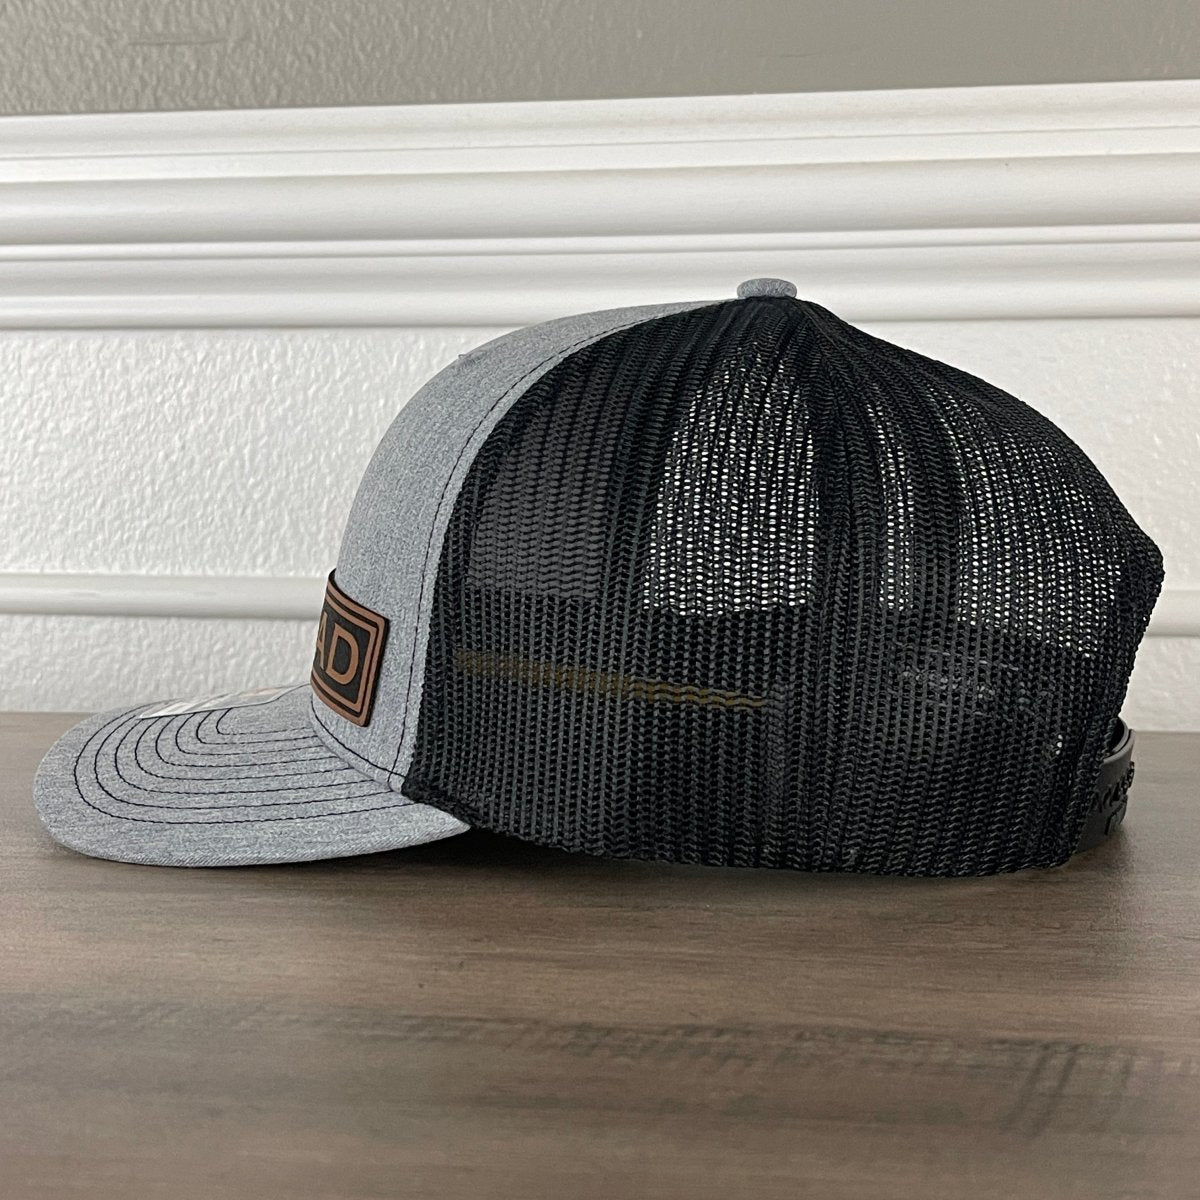 DAD Side Leather Patch Hat Patch Hat - VividEditions